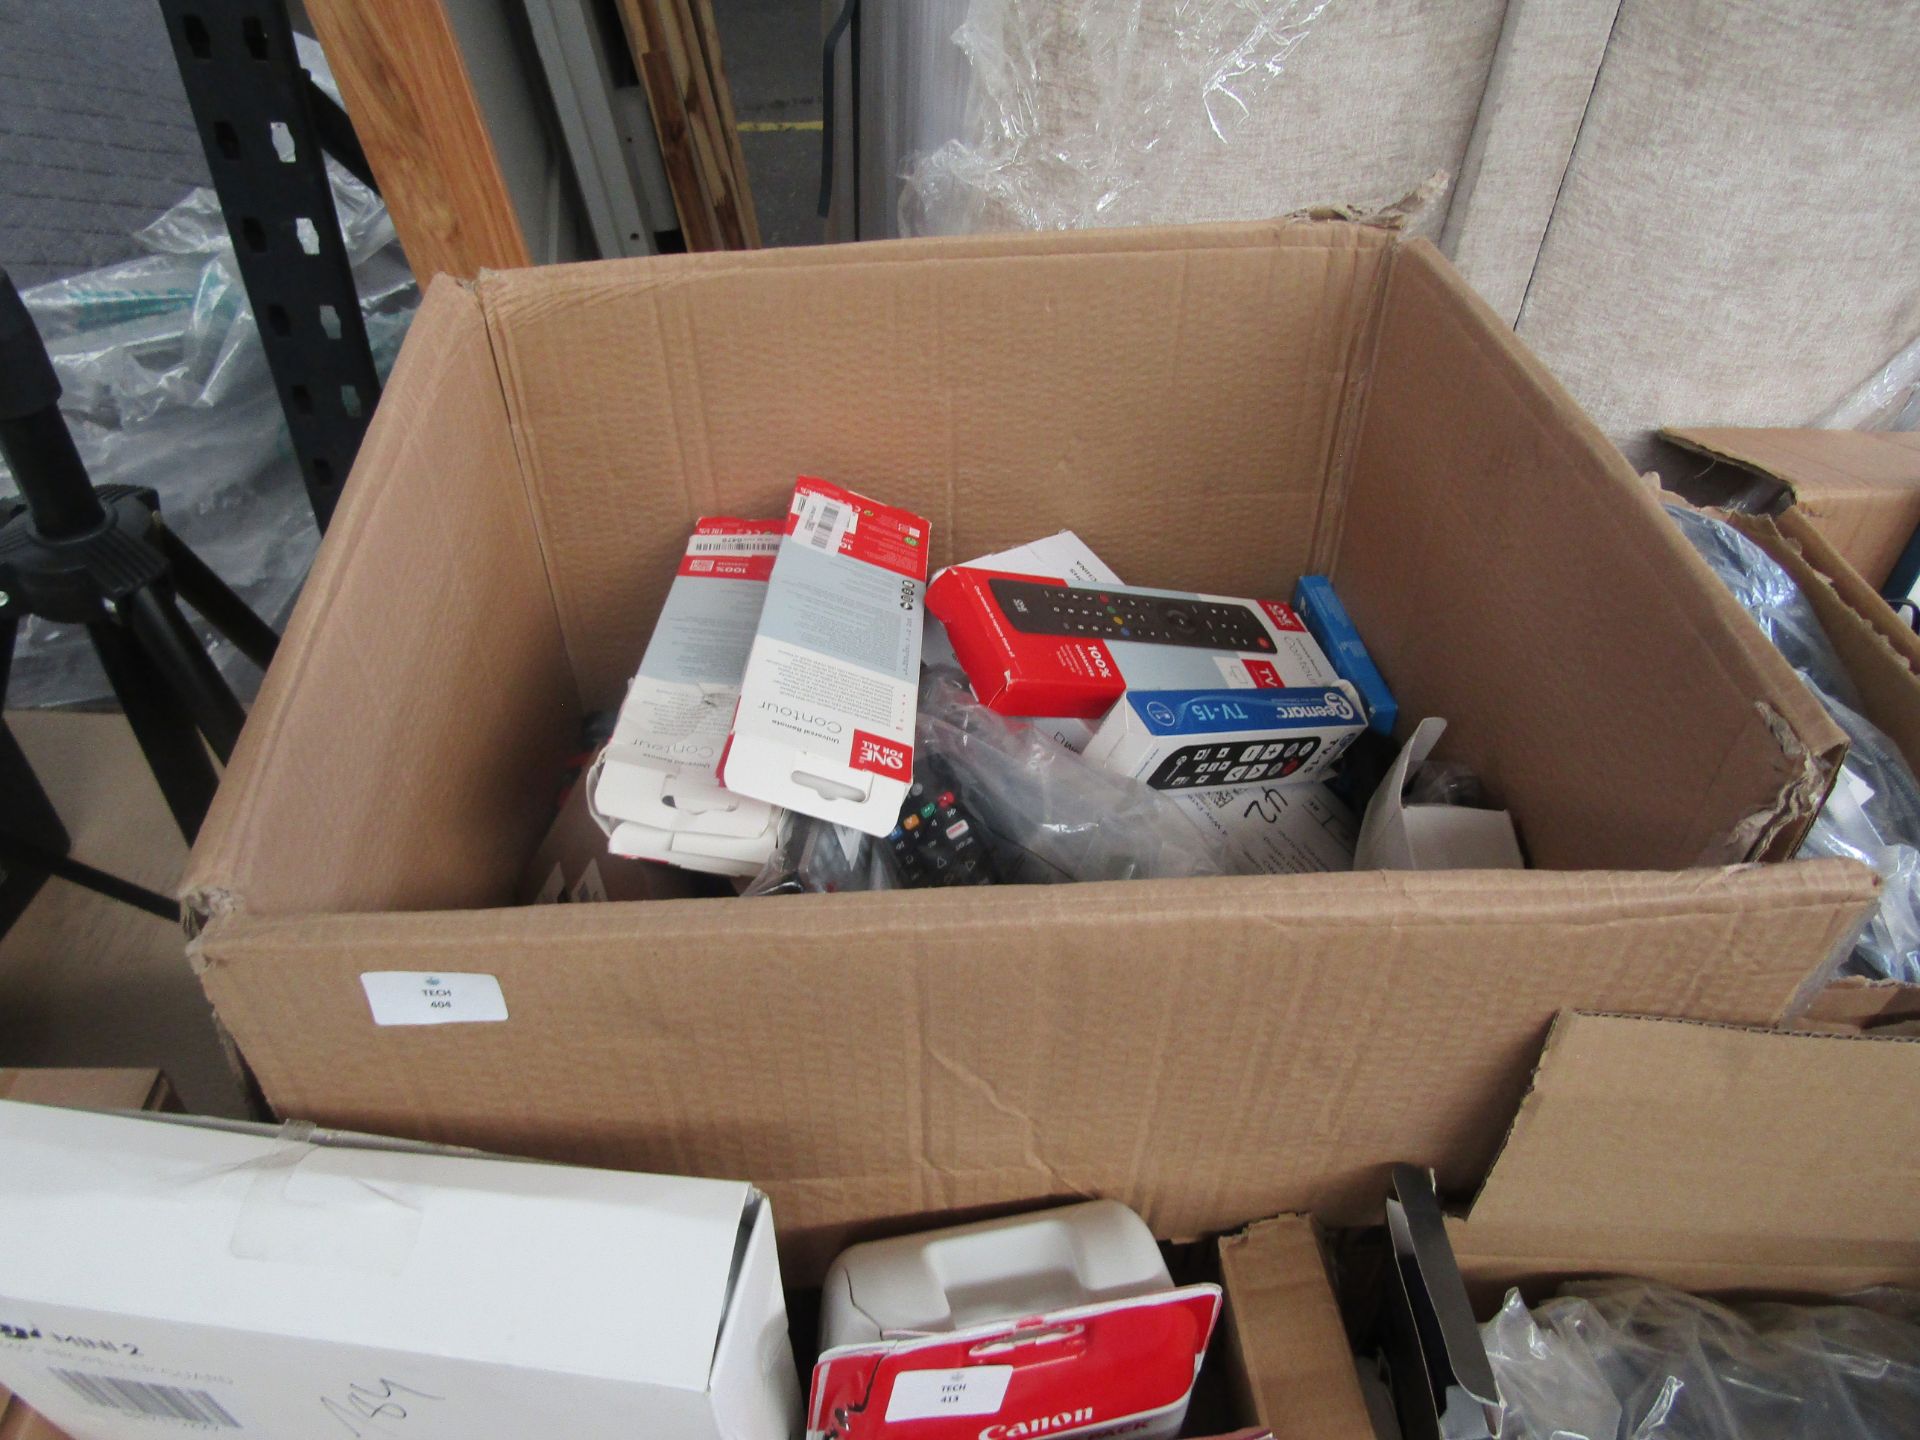 Box Of Mixed Items Including, Universal Remotes, Cables, Tv Antena, Headsets & More, See Image For